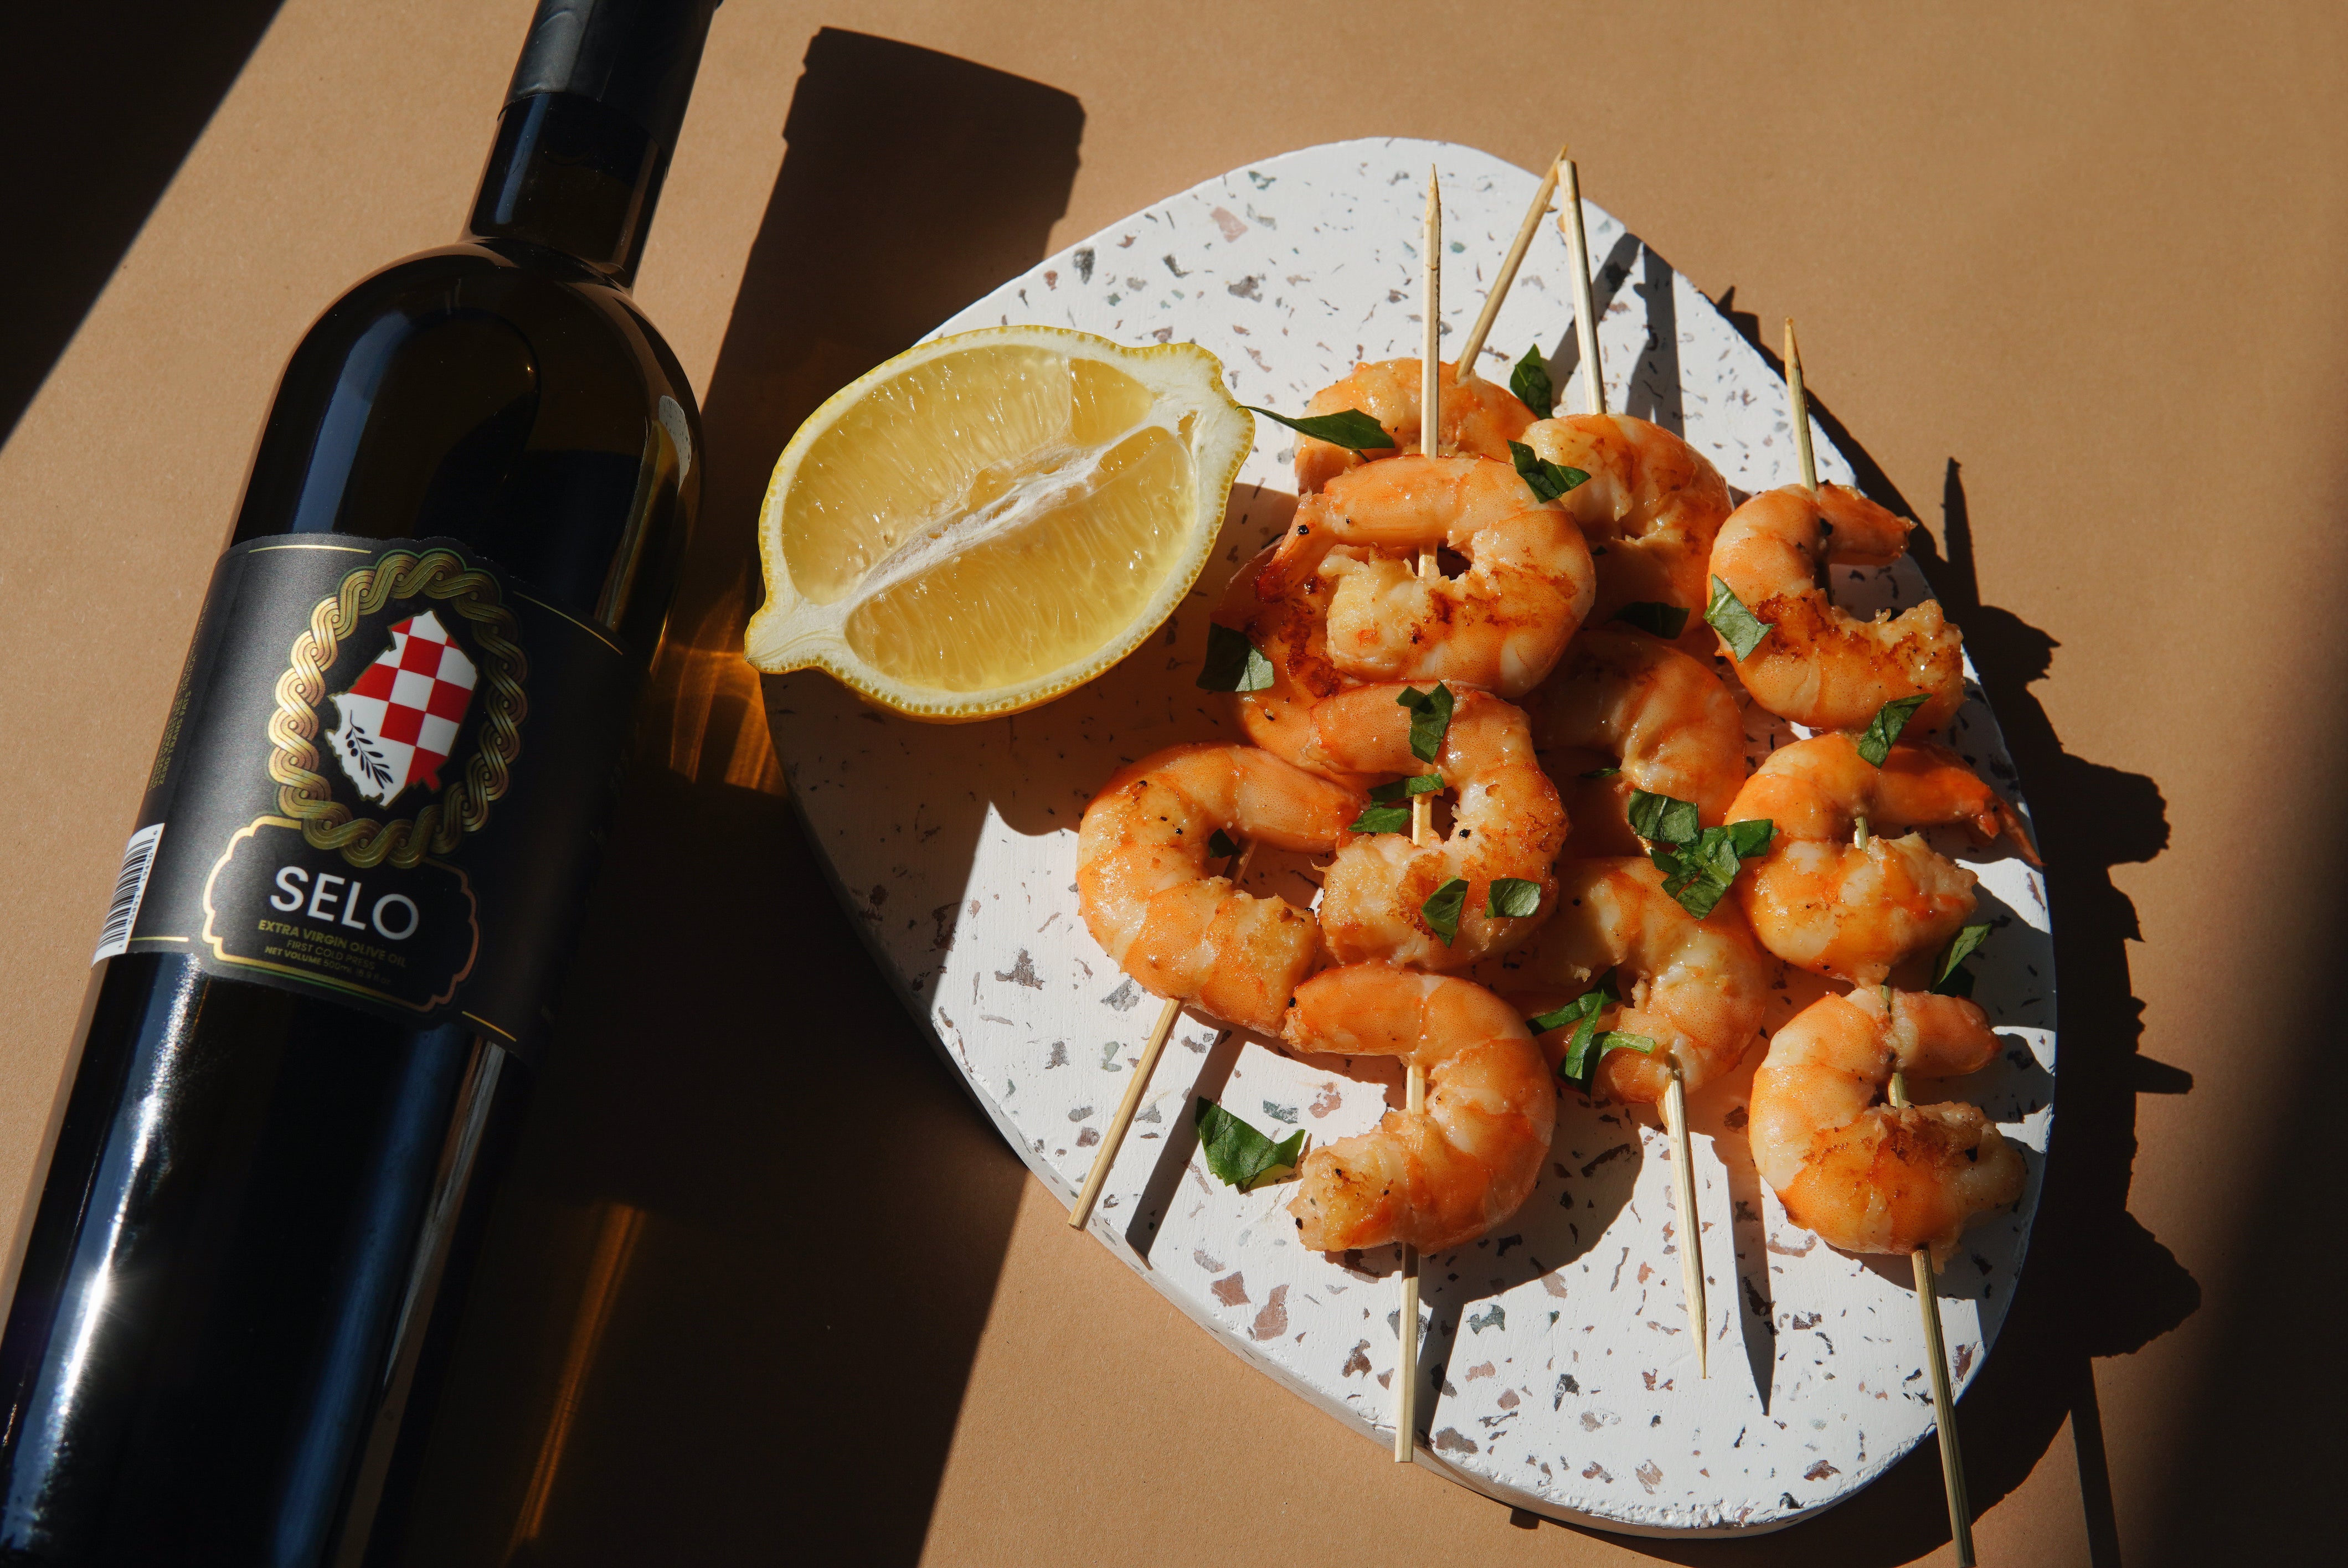 Grilled shrimp skewer glistening with Selo Olive oil, showcasing succulent shrimp cooked to perfection, lightly coated with the rich golden hue of the olive oil, presenting a tantalizing seafood dish that promises a delightful burst of flavors.